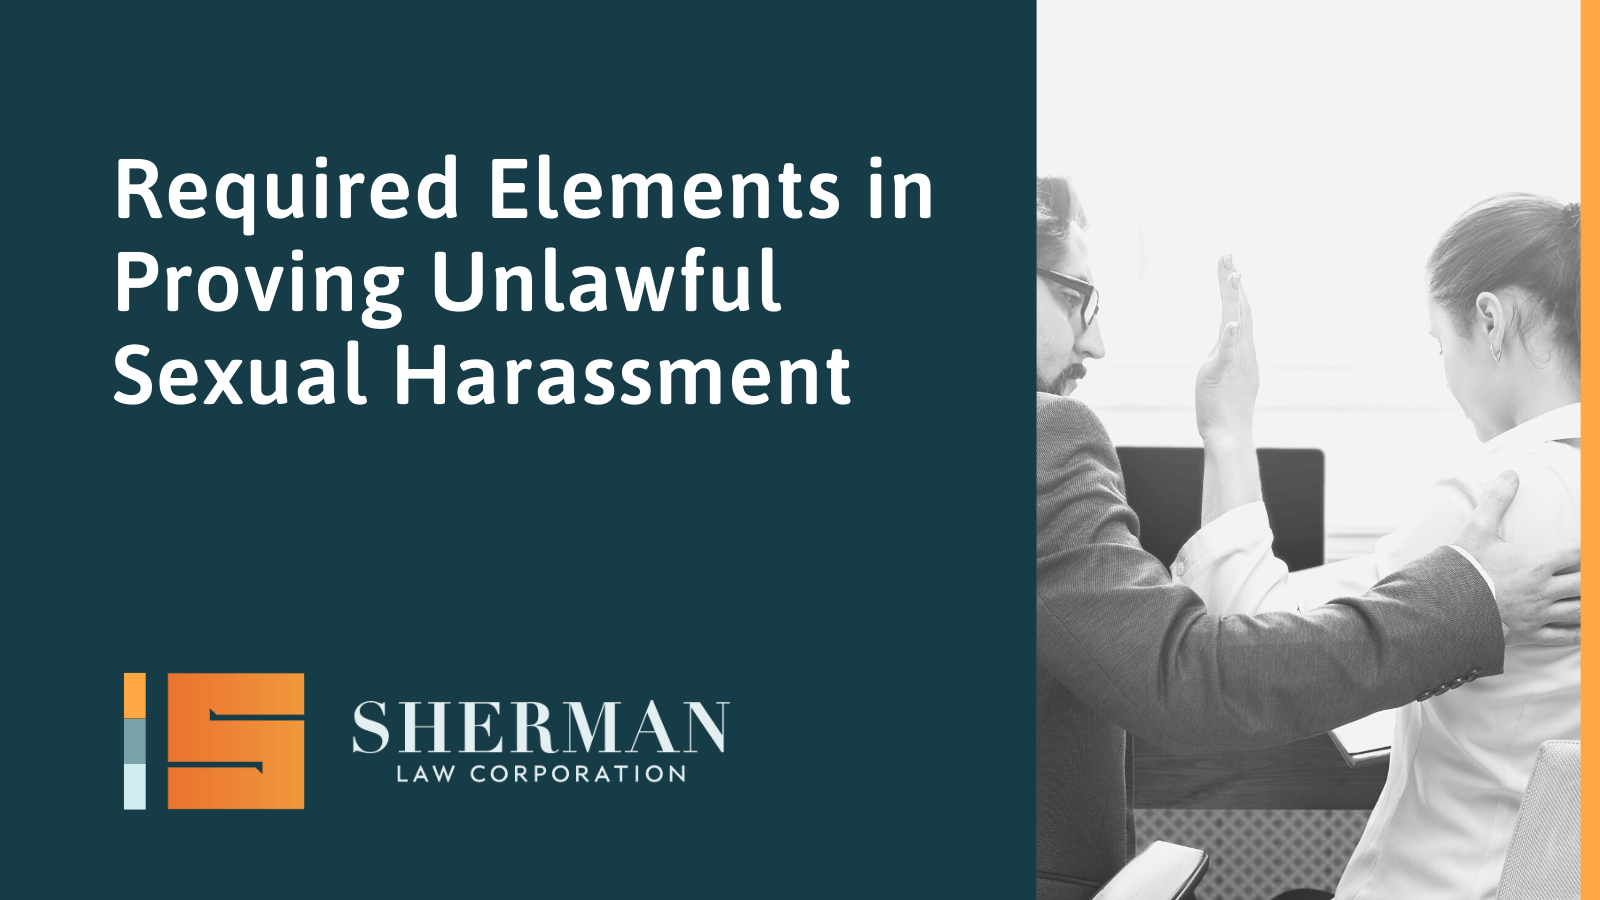 Required Elements in Proving Unlawful Sexual Harassment- california employment lawyer - sherman law corporation